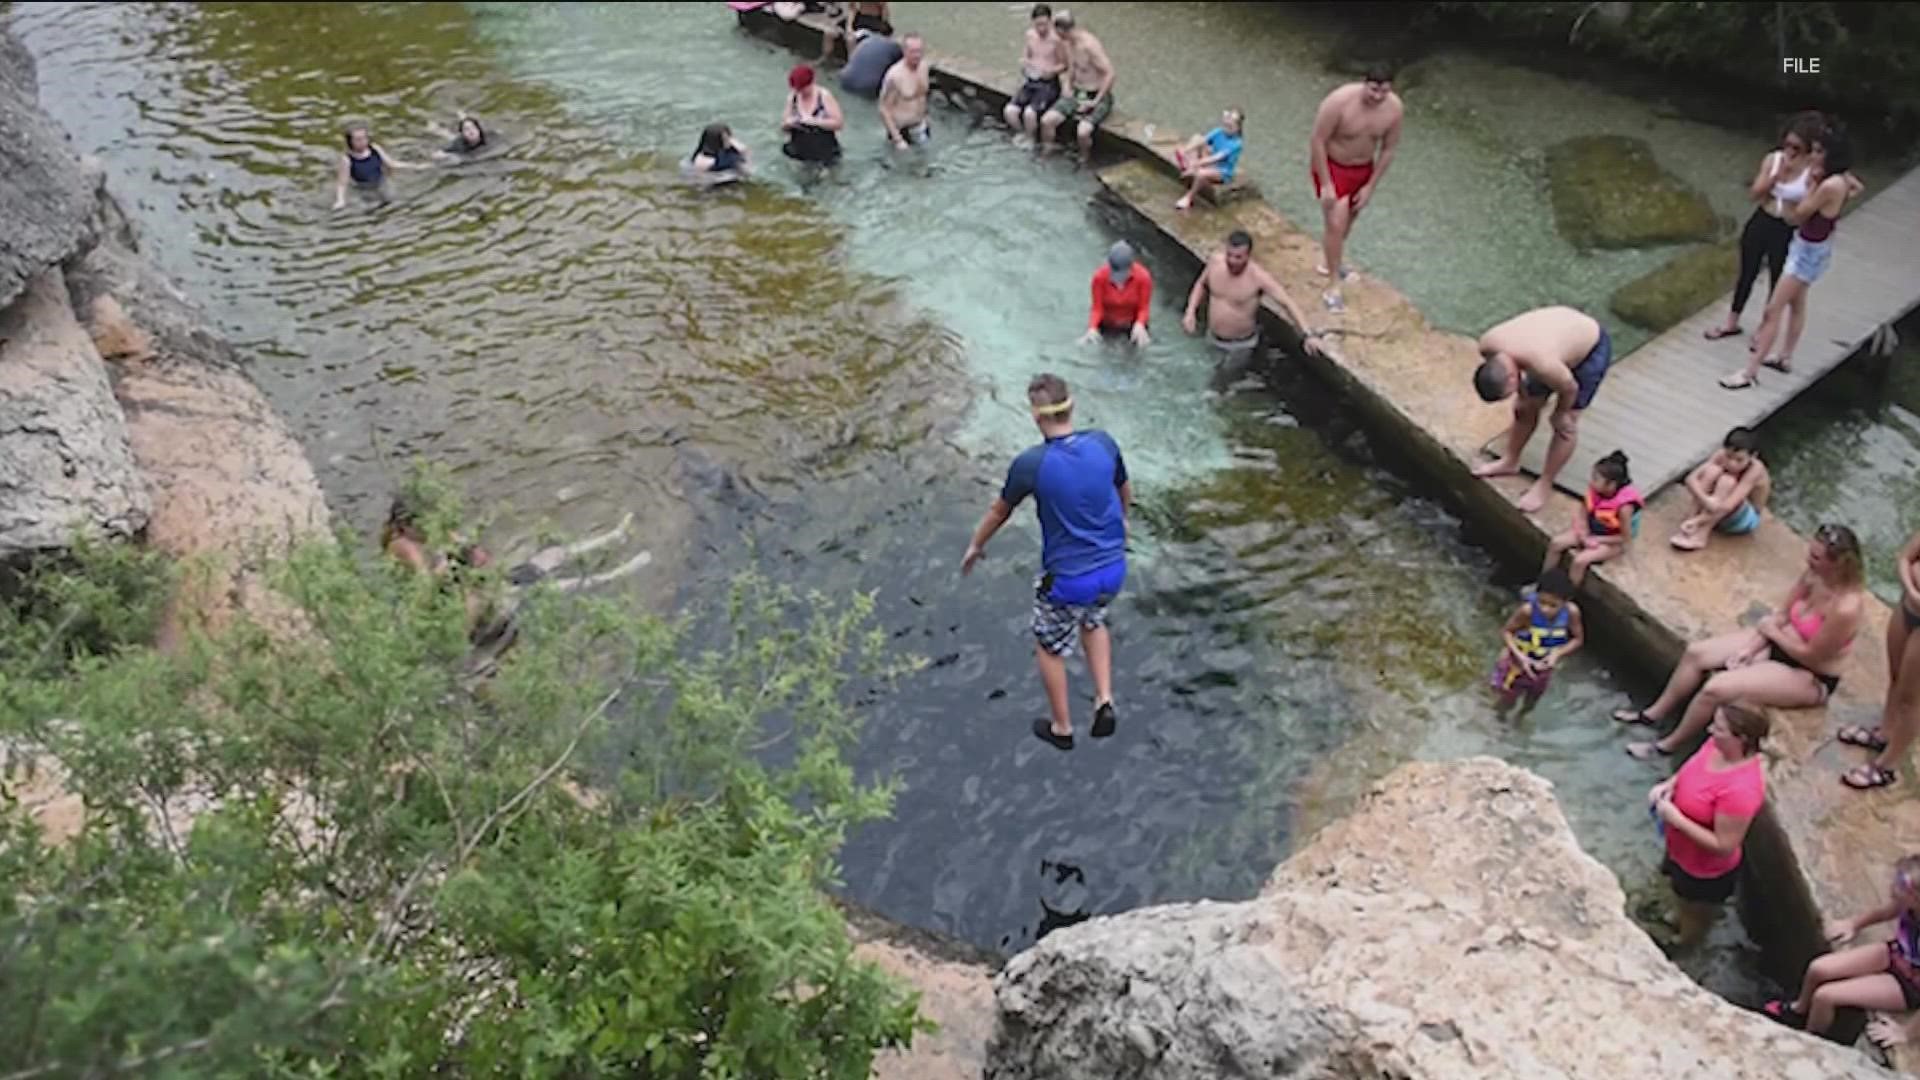 For only the fourth time in history, the water has stopped flowing at Jacob's Well.